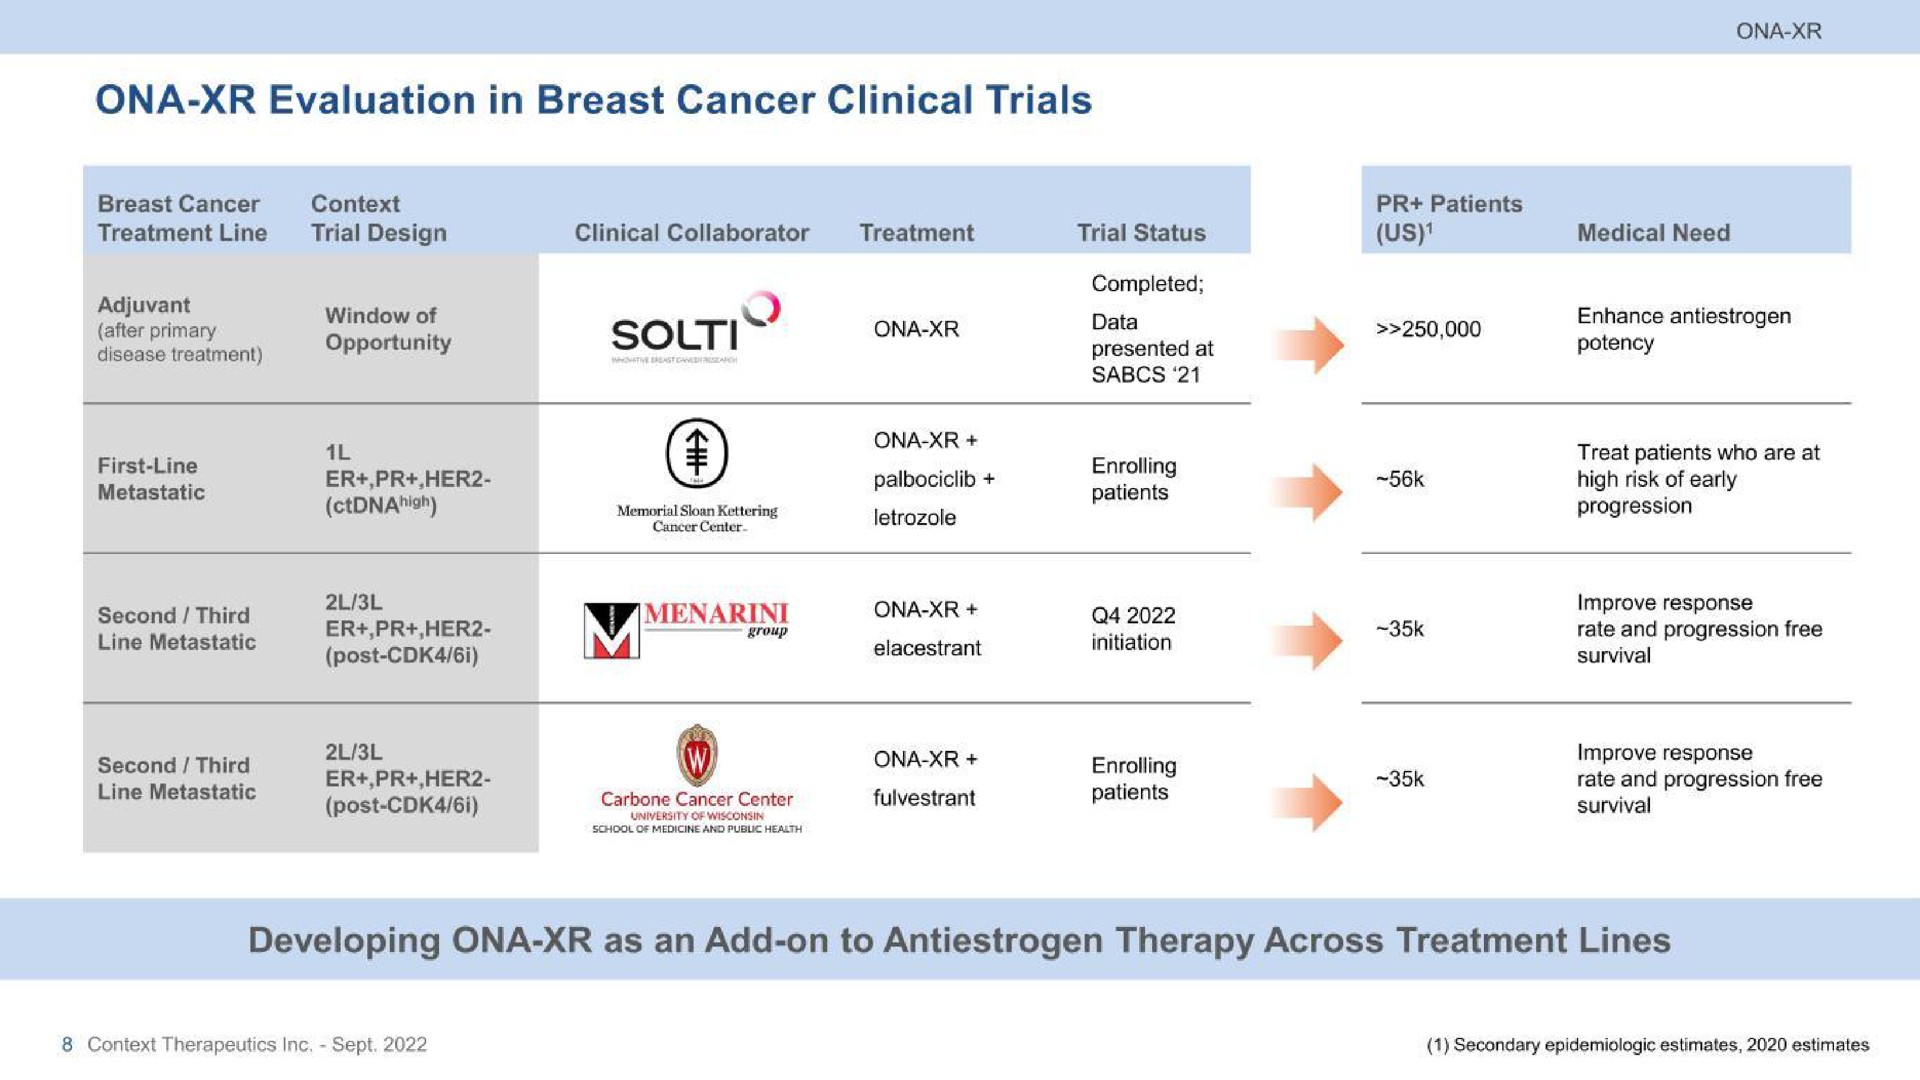 ona evaluation in breast cancer clinical trials adjuvant window of her ona post i developing ona as an add on to therapy across treatment lines | Context Therapeutics